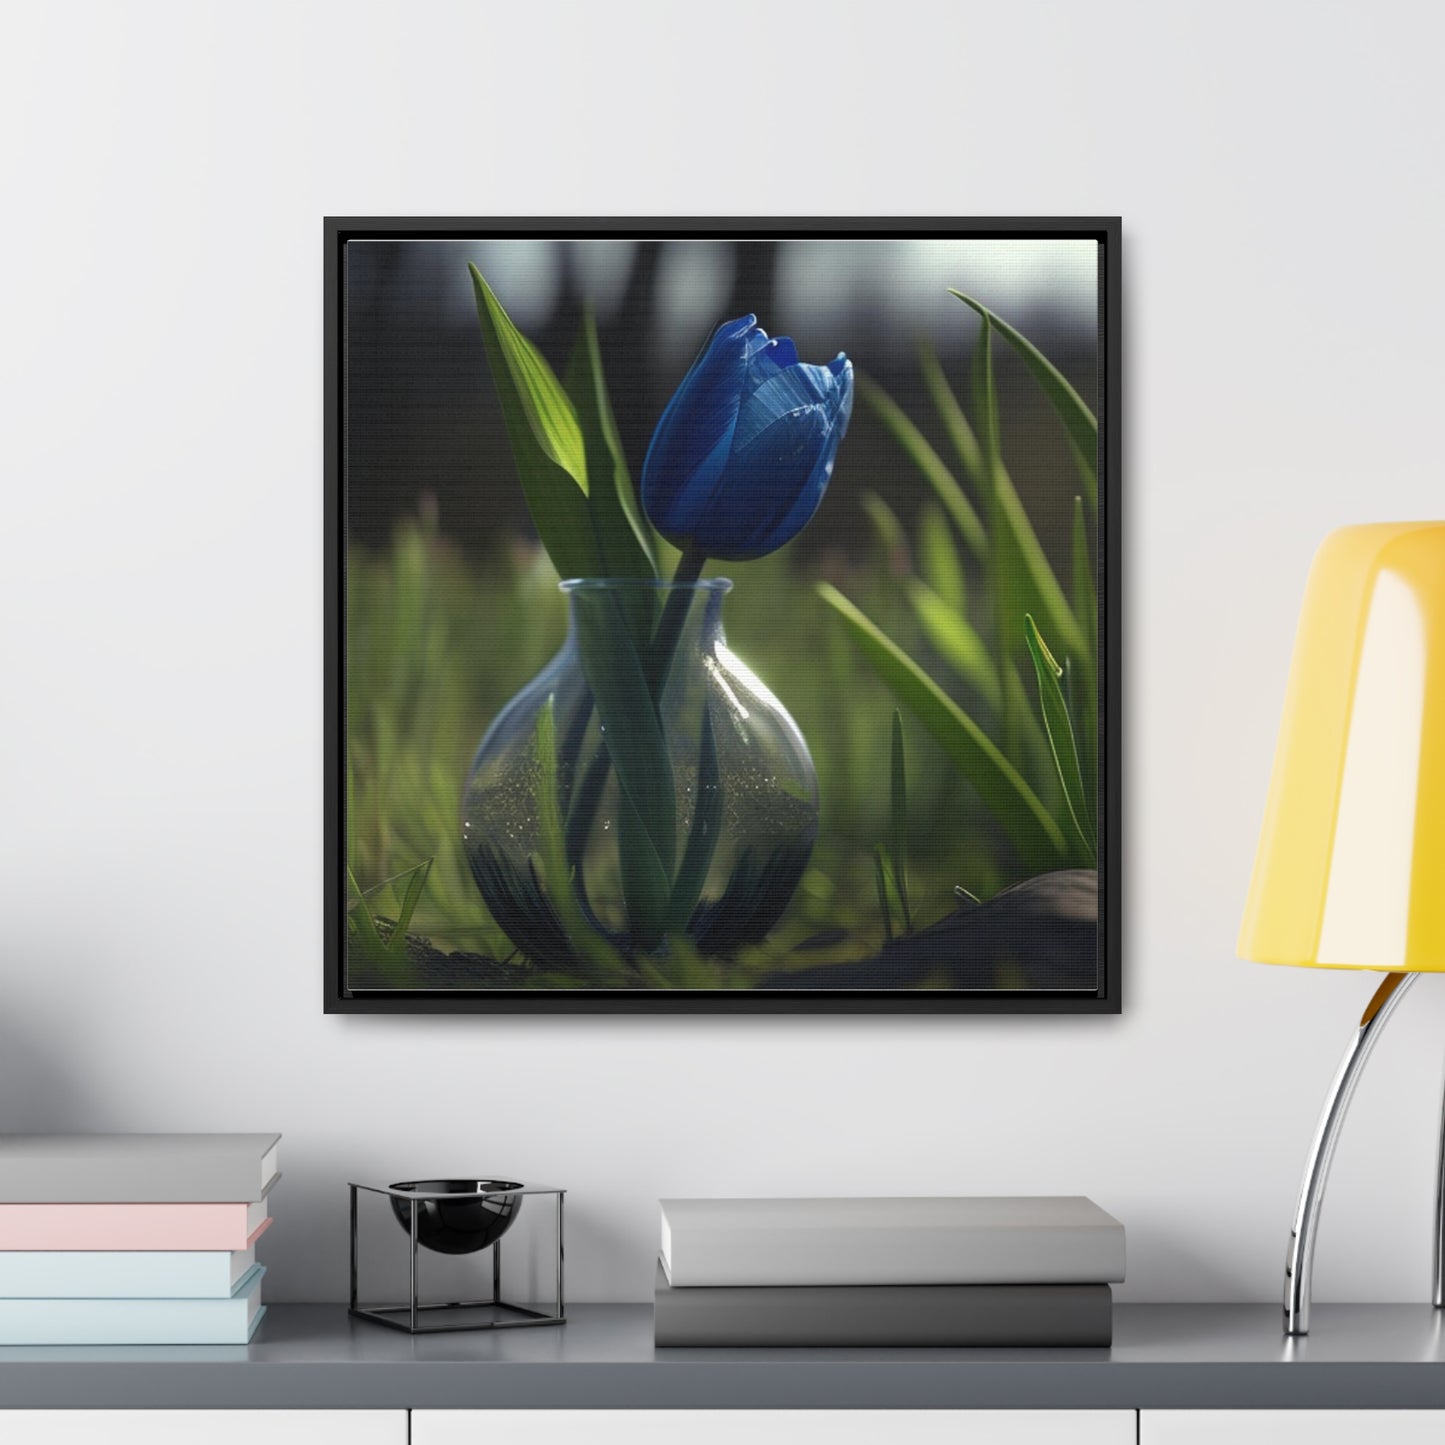 Gallery Canvas Wraps, Square Frame Tulip 1